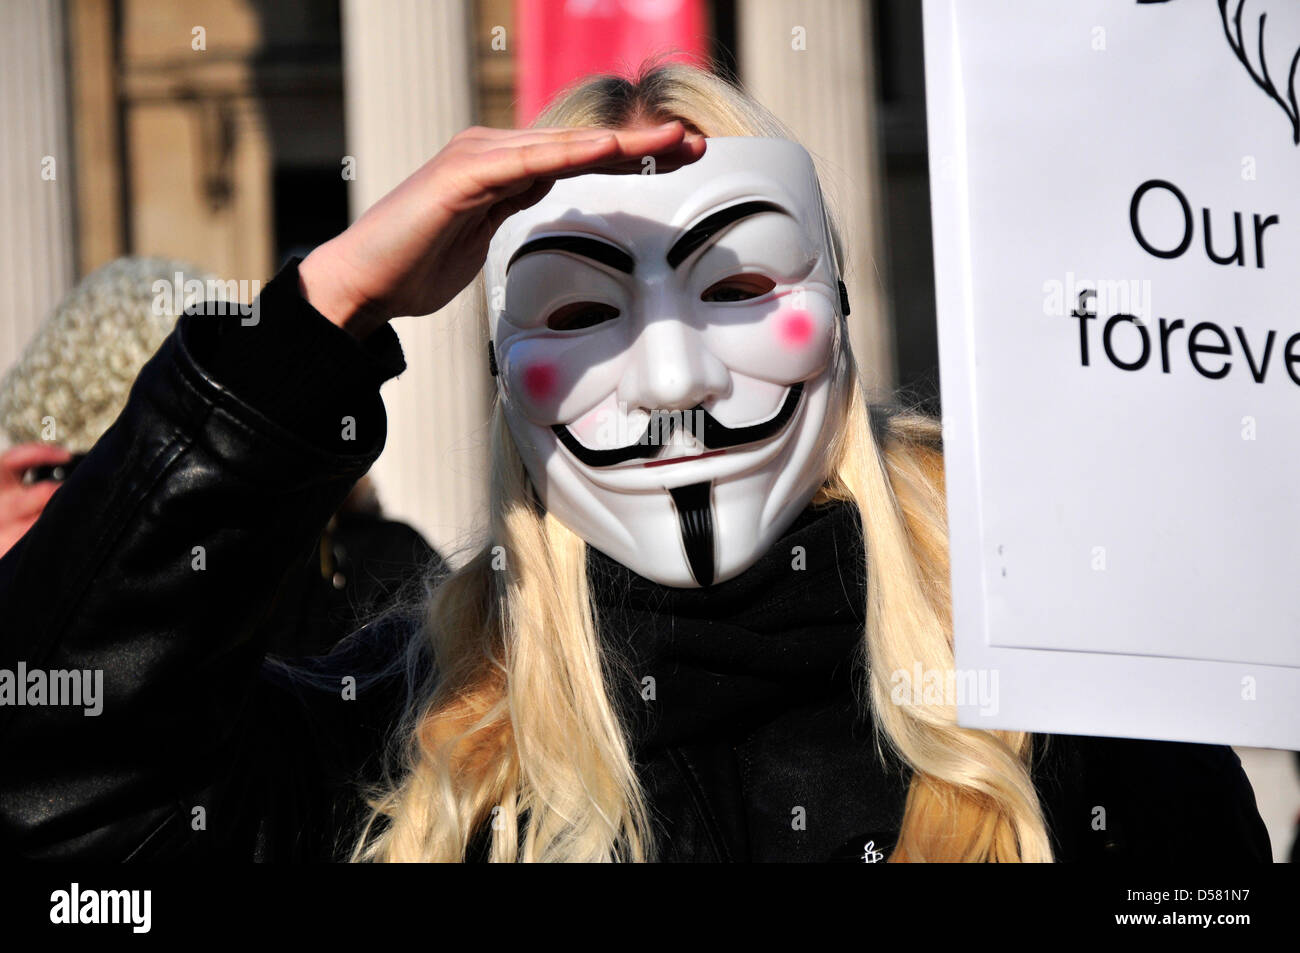 A protester wearing an anonymous mask at a rally in Trafalgar Square, London Stock Photo